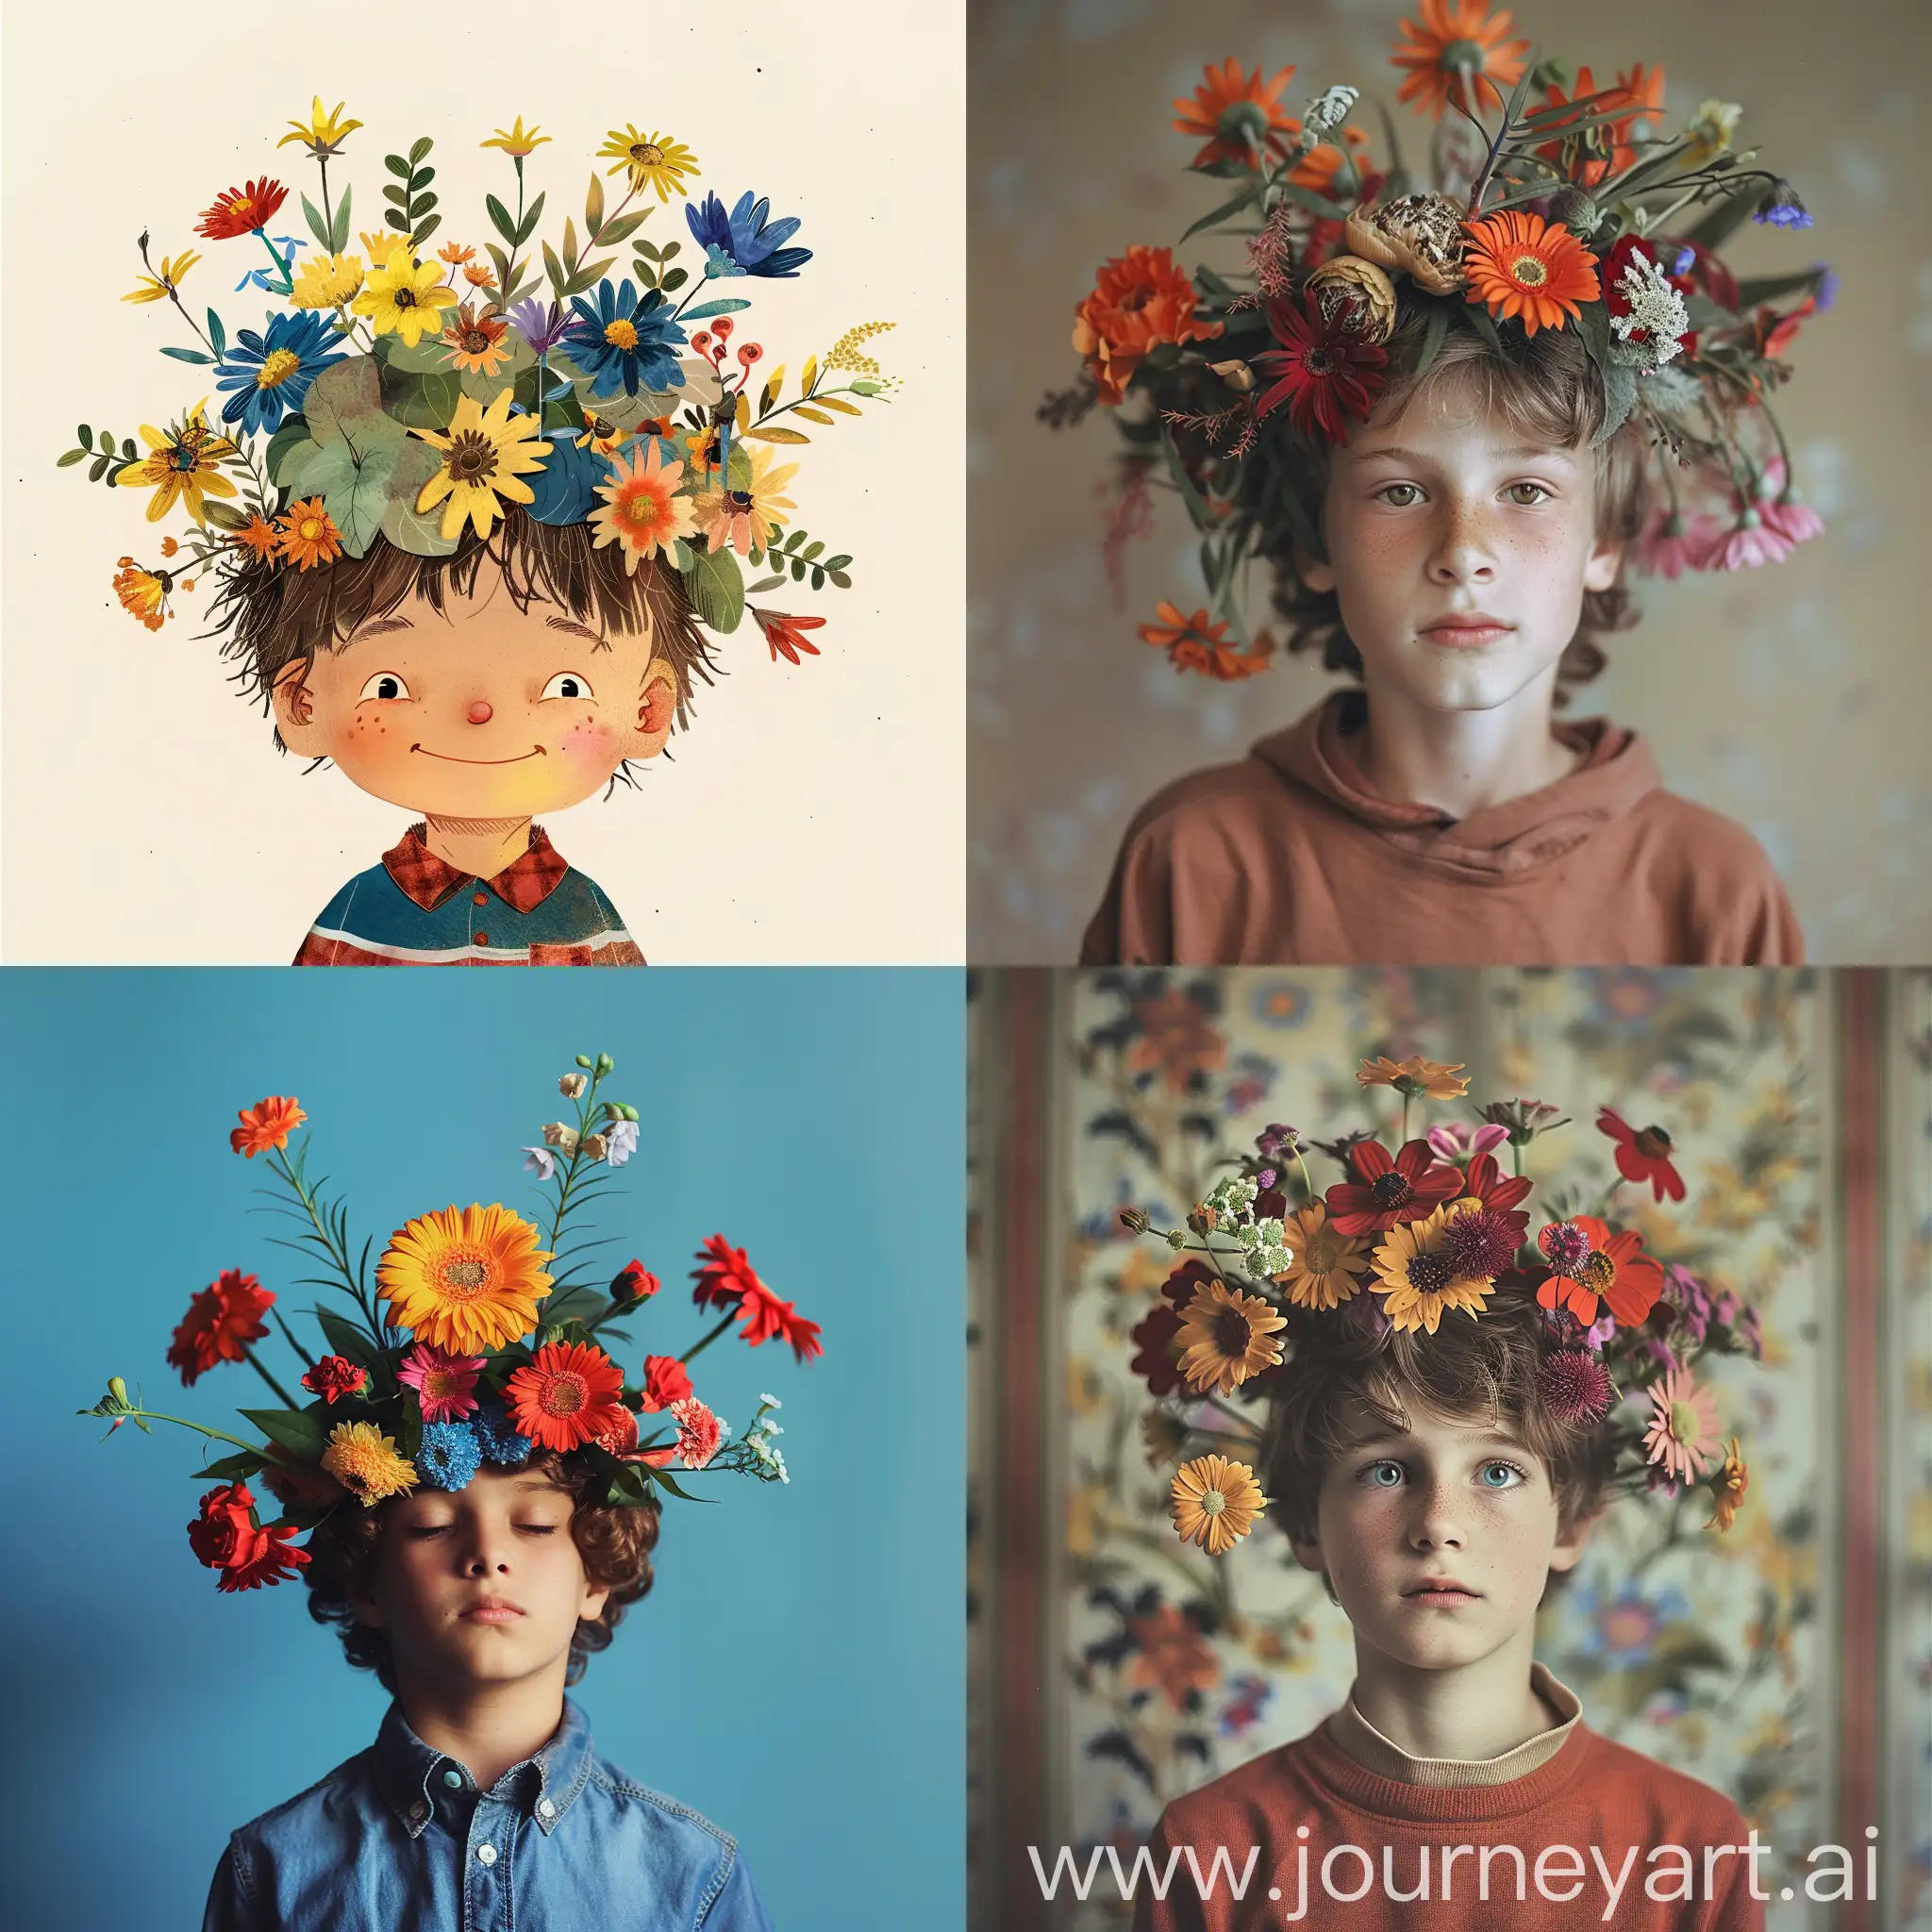 Boy-with-Floral-Crown-Innocent-Charm-and-Natural-Beauty